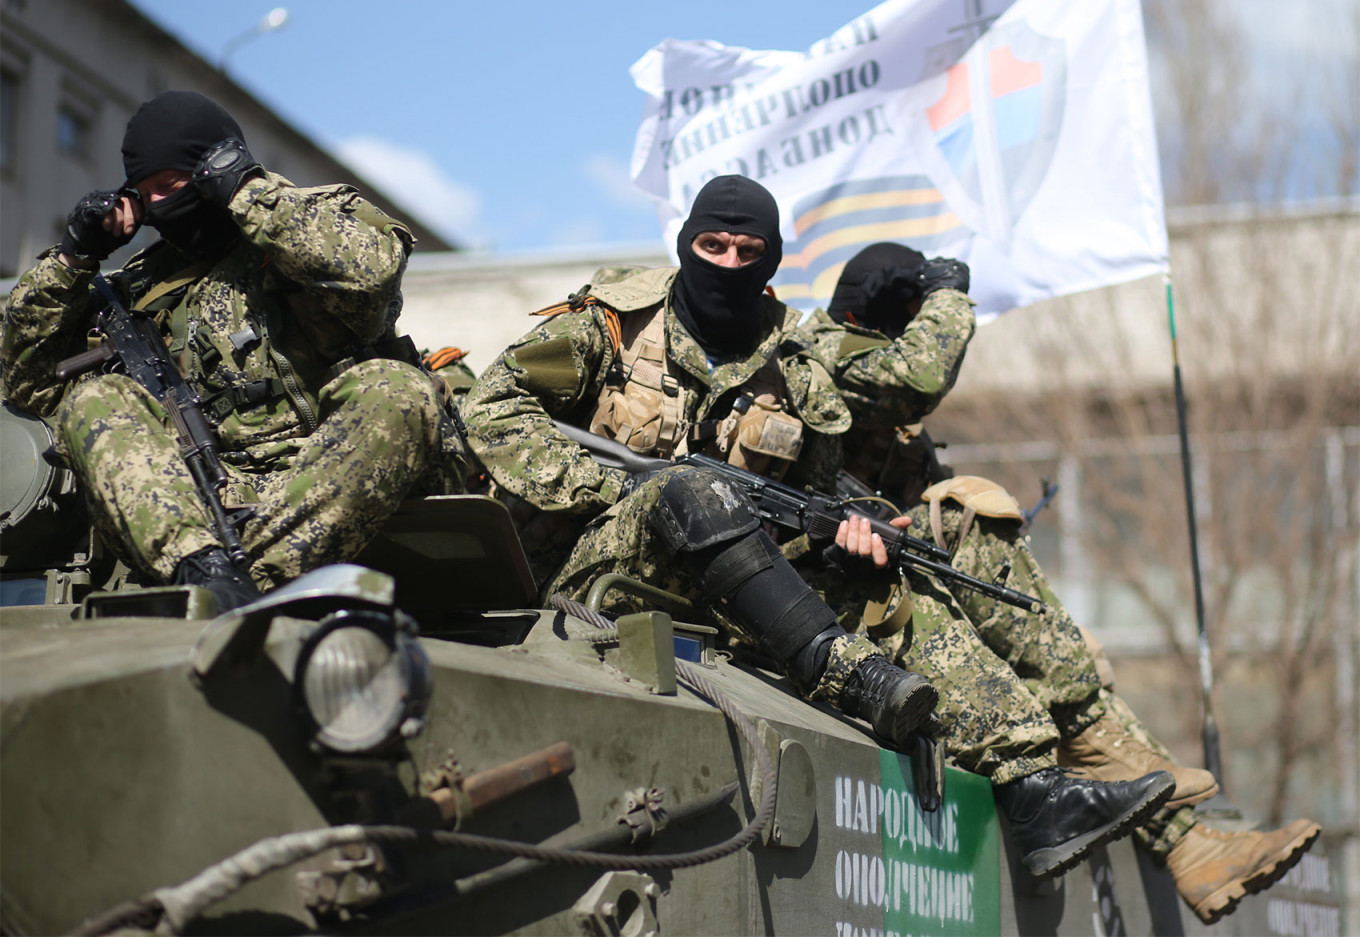 
					Members of Donbass self defense units in the town of Sloviansk in April 2014.					 					Mikhail Pochuyev / TASS				